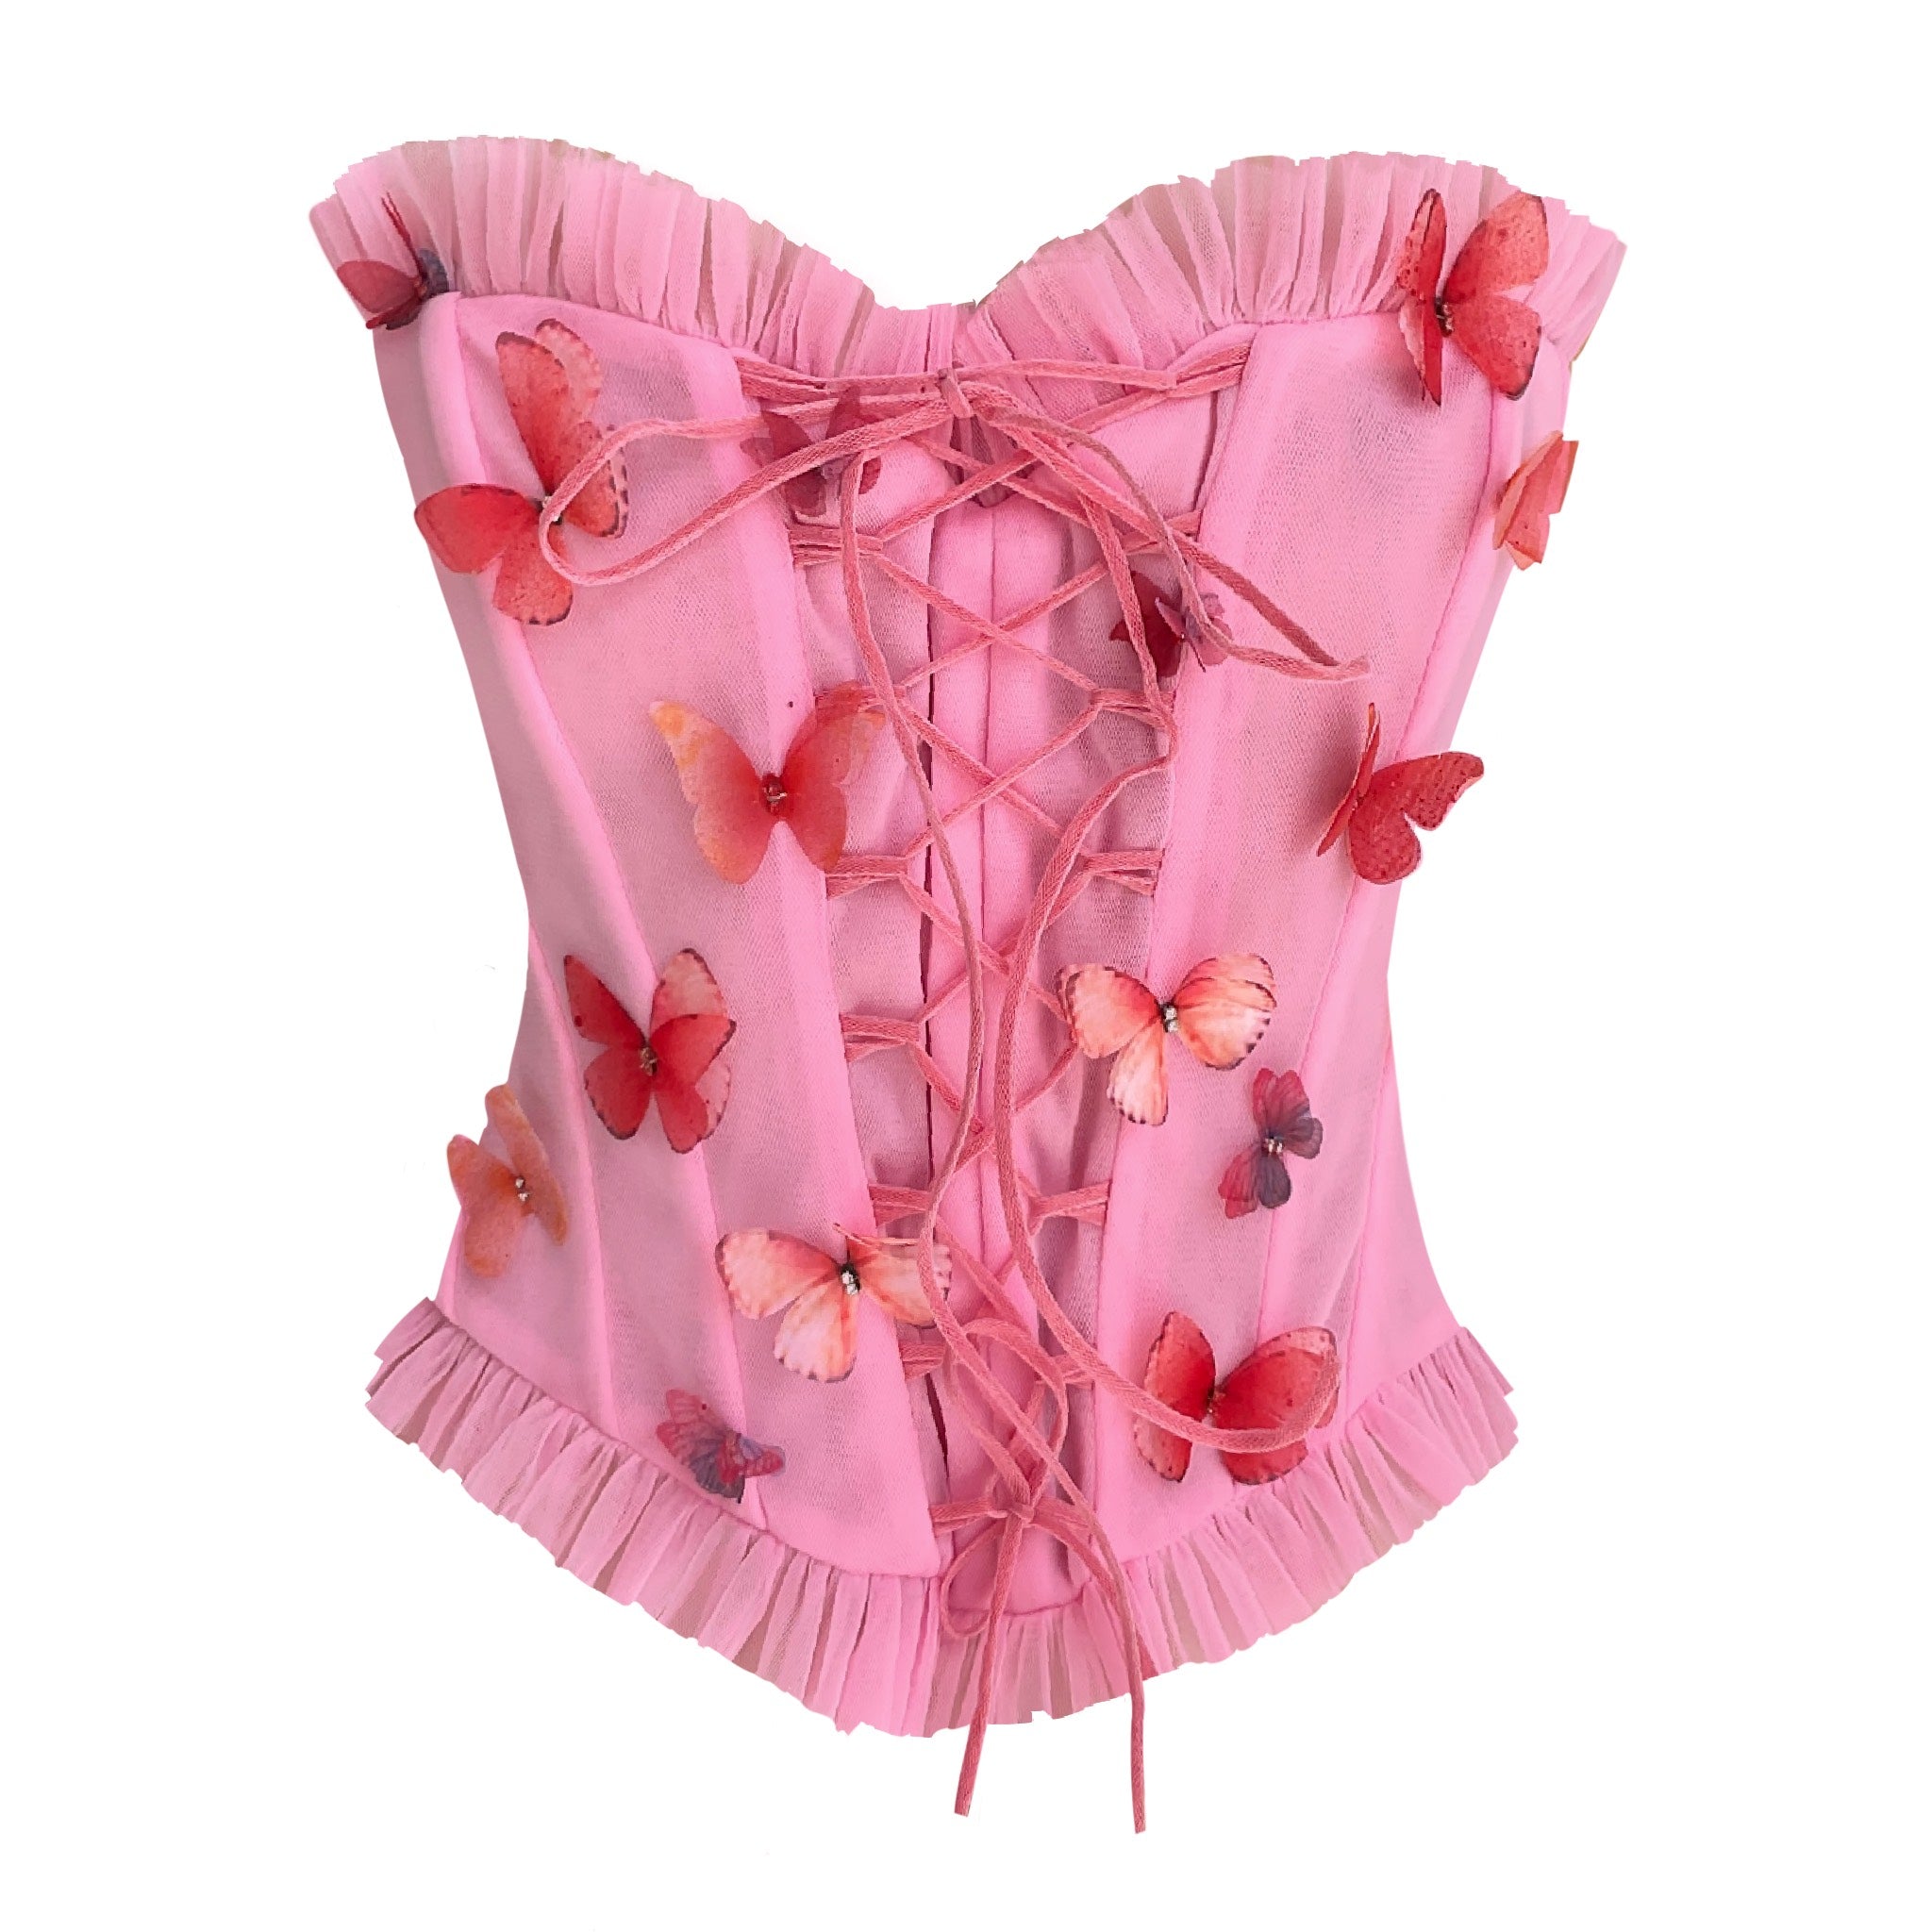 Butterfly Appliques Fairycore Bustier Corset - Y2k Aesthetic, Pink